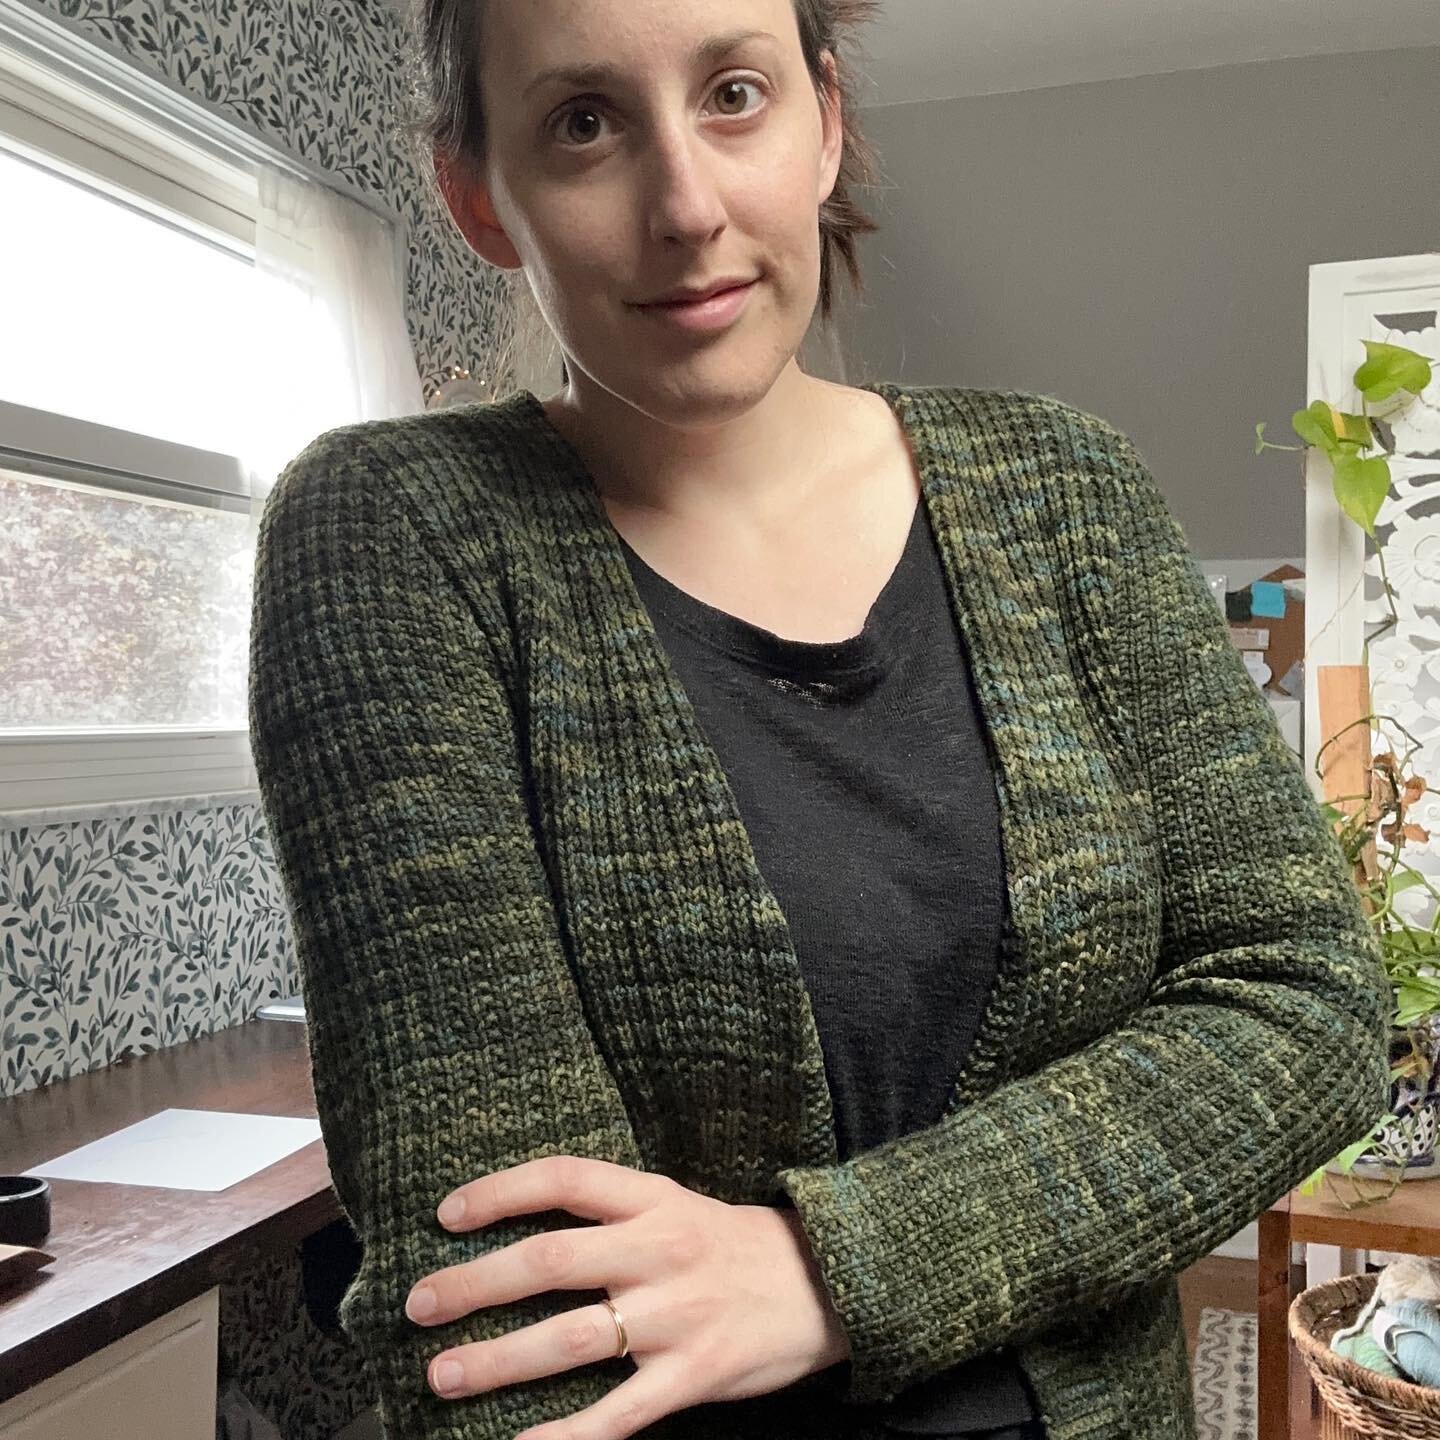 Oh hey, it&rsquo;s Me Made May! Please enjoy me looking awkwardly staged af in my Ridgeview Cardigan! I love this thing - I wear it all the time, like multiple times per week. So much so that I&rsquo;ve already had to patch one elbow and need to rein